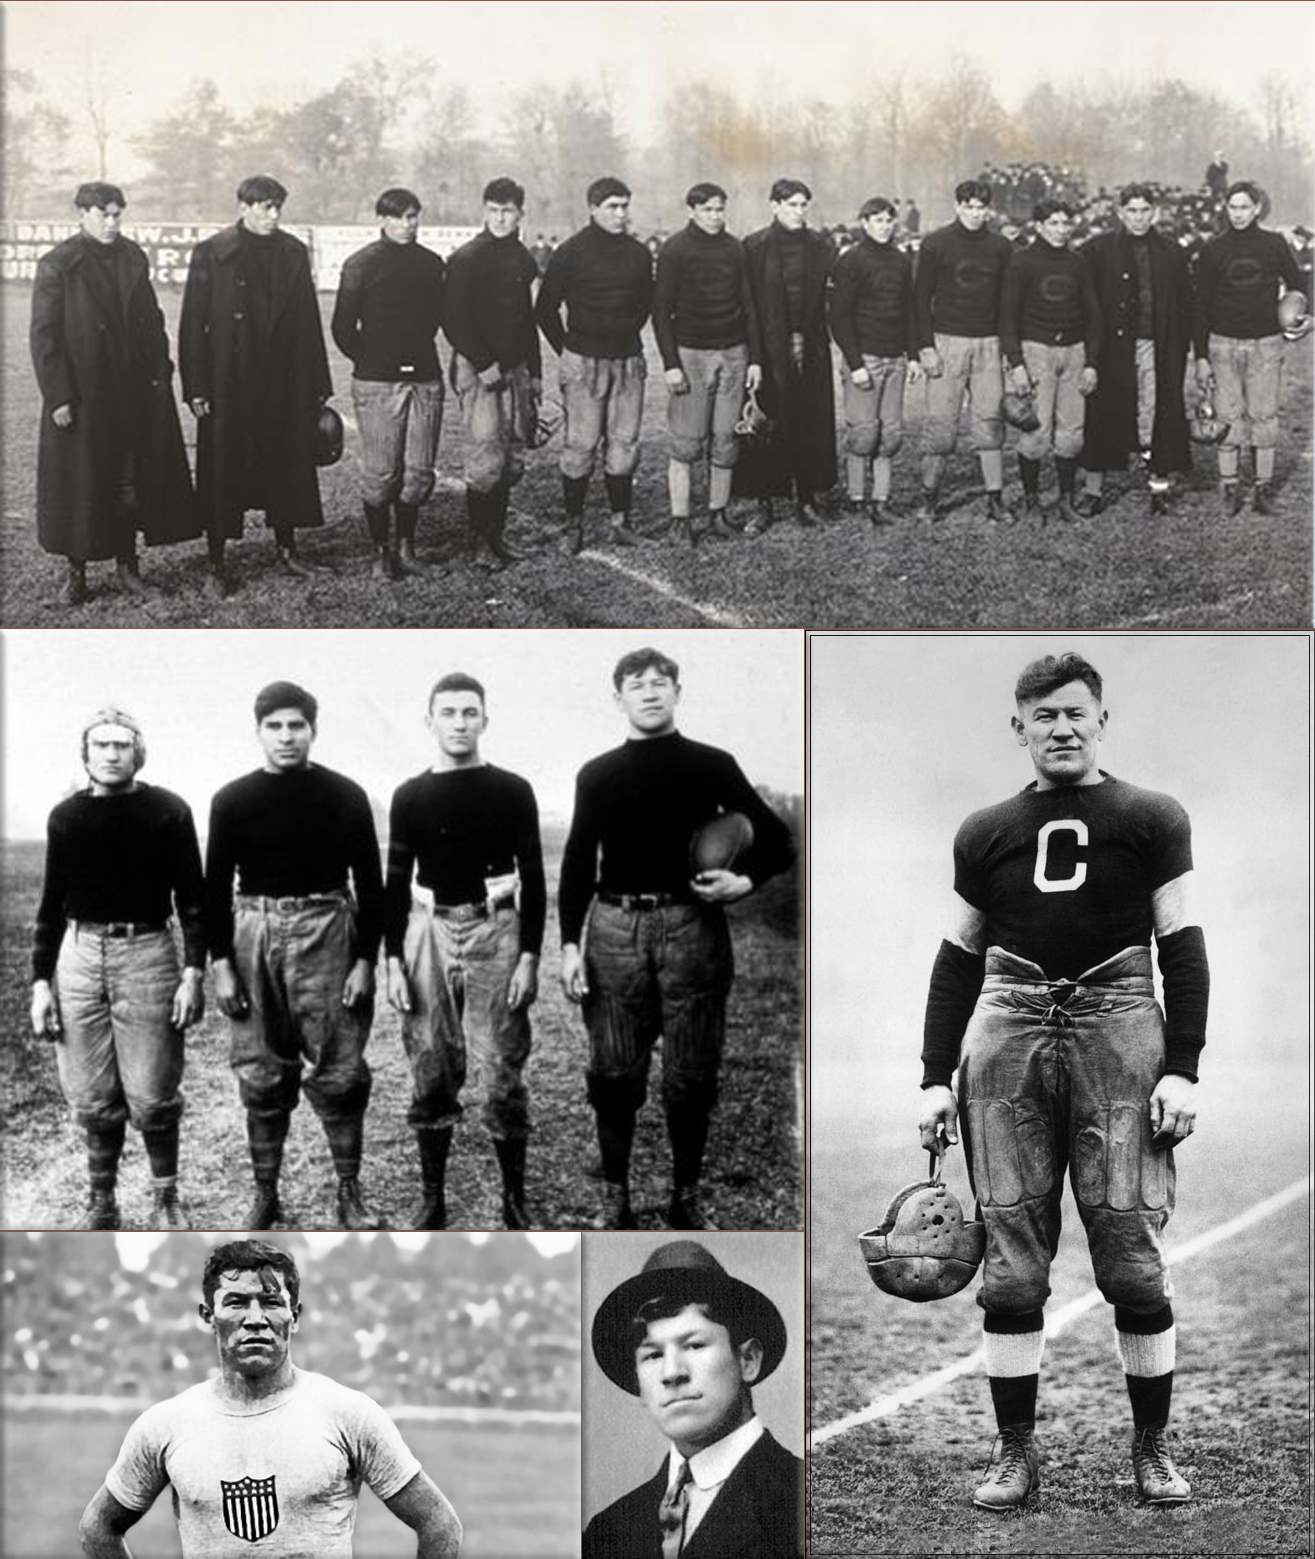 American Professional Football Association (later renamed National Football League) is organized in Canton, Ohio, United States